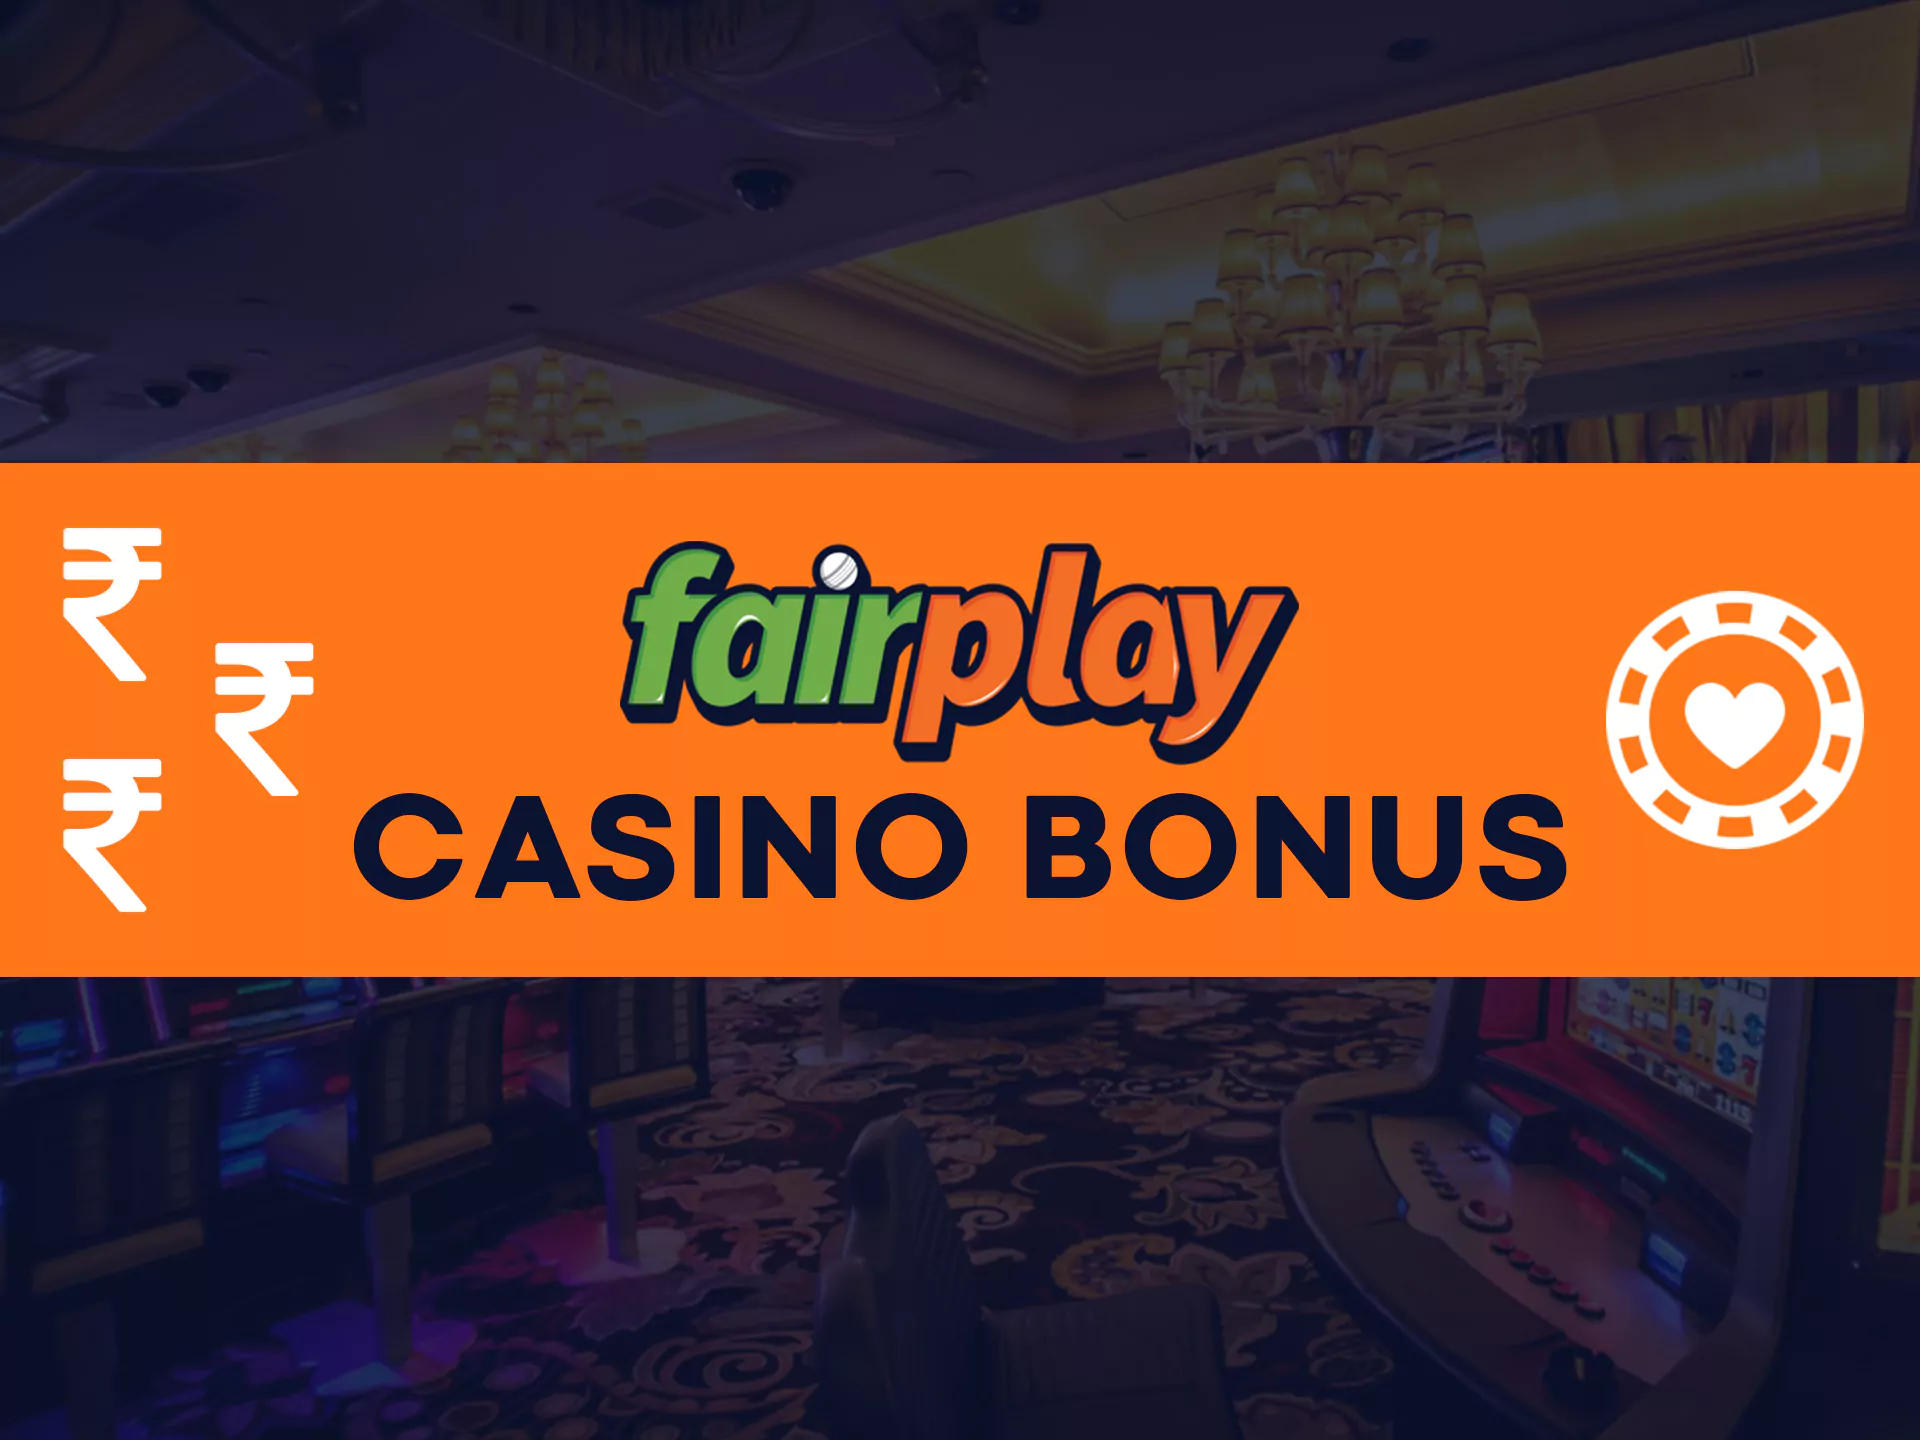 Get bonuses for playing at Fairplay casino.